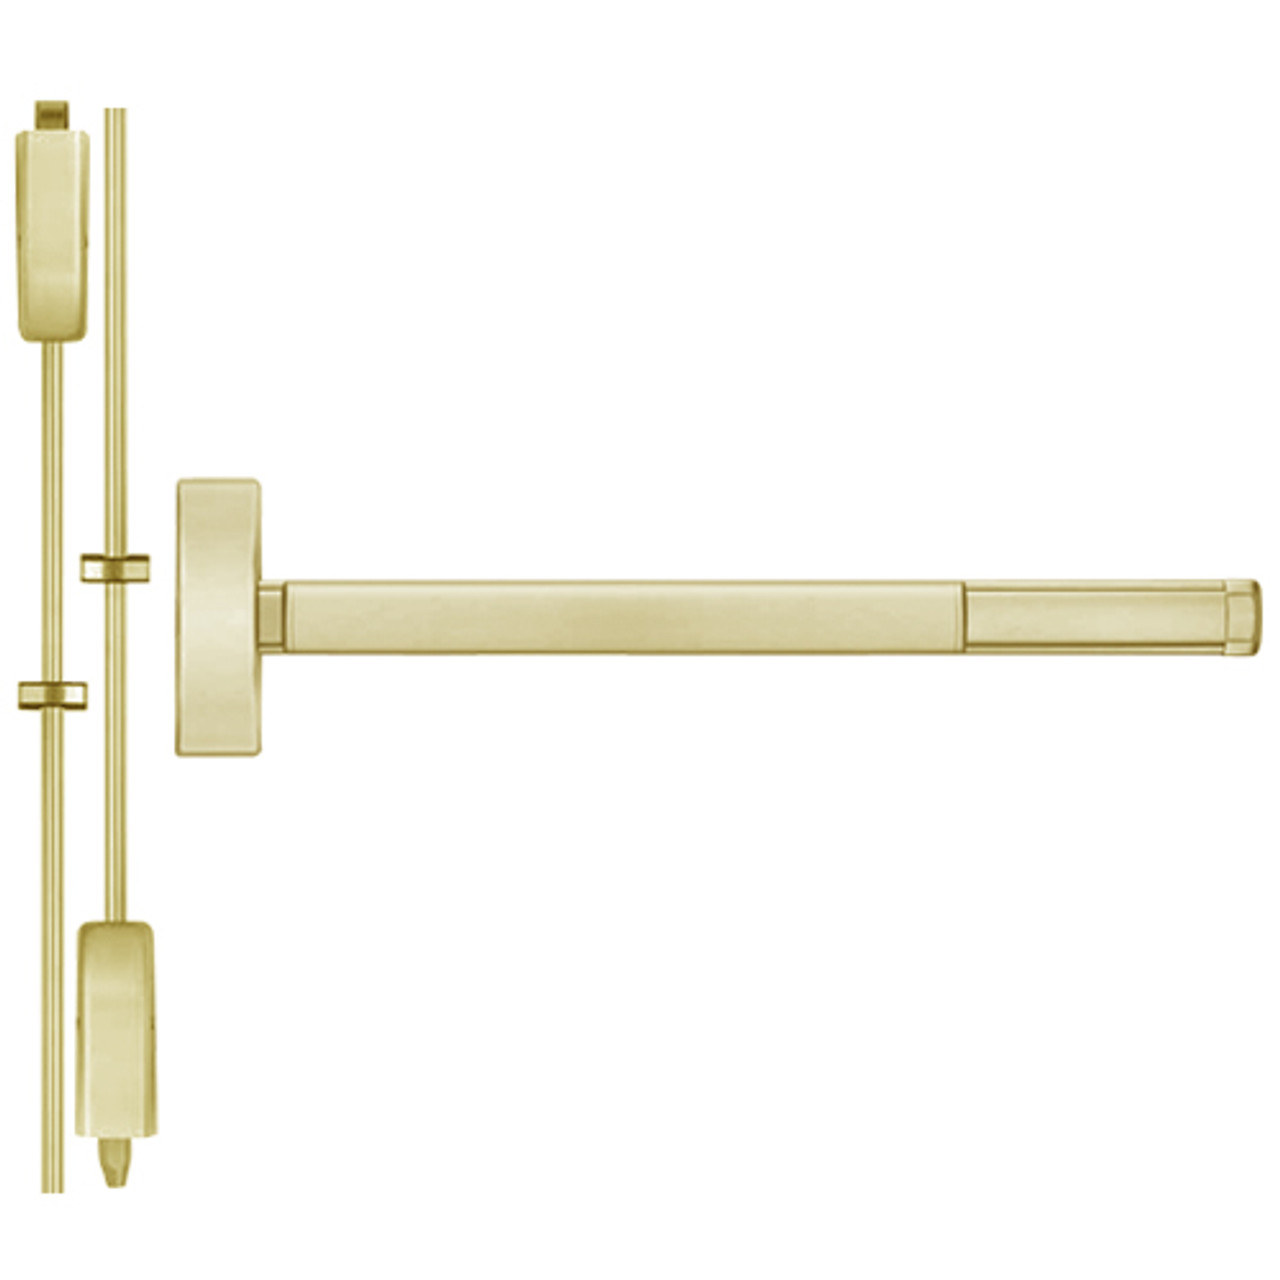 TSFL2201-606-36 PHI 2200 Series Apex Surface Vertical Rod Device with Touchbar Monitoring Switch Prepped for Cover Plate in Satin Brass Finish